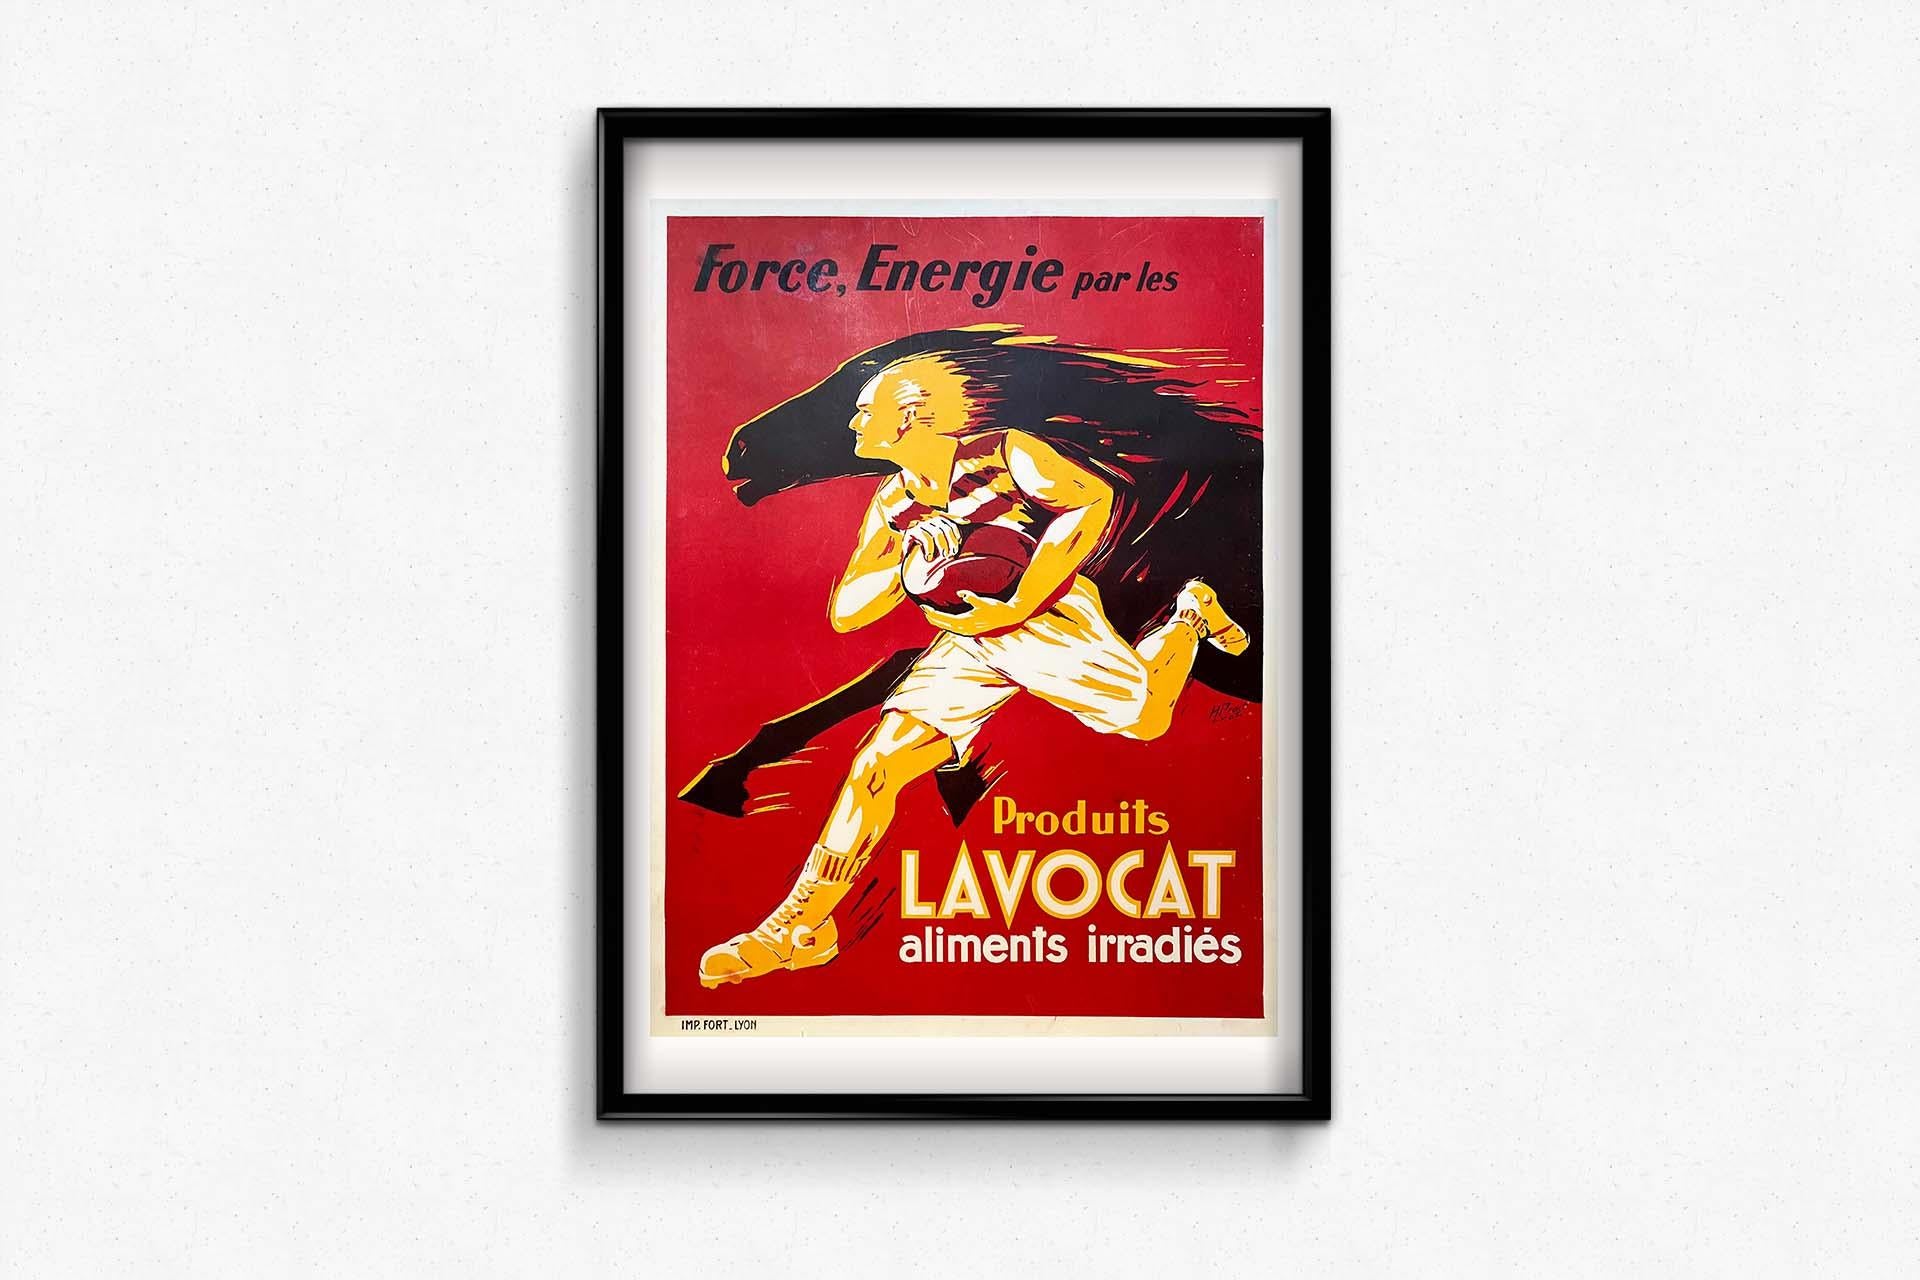 This magnificent original poster from the late Art Deco period was created for the Lavocat brand.
It shows a rugby player running at stallion speed - no doubt thanks to Lavocat, an 